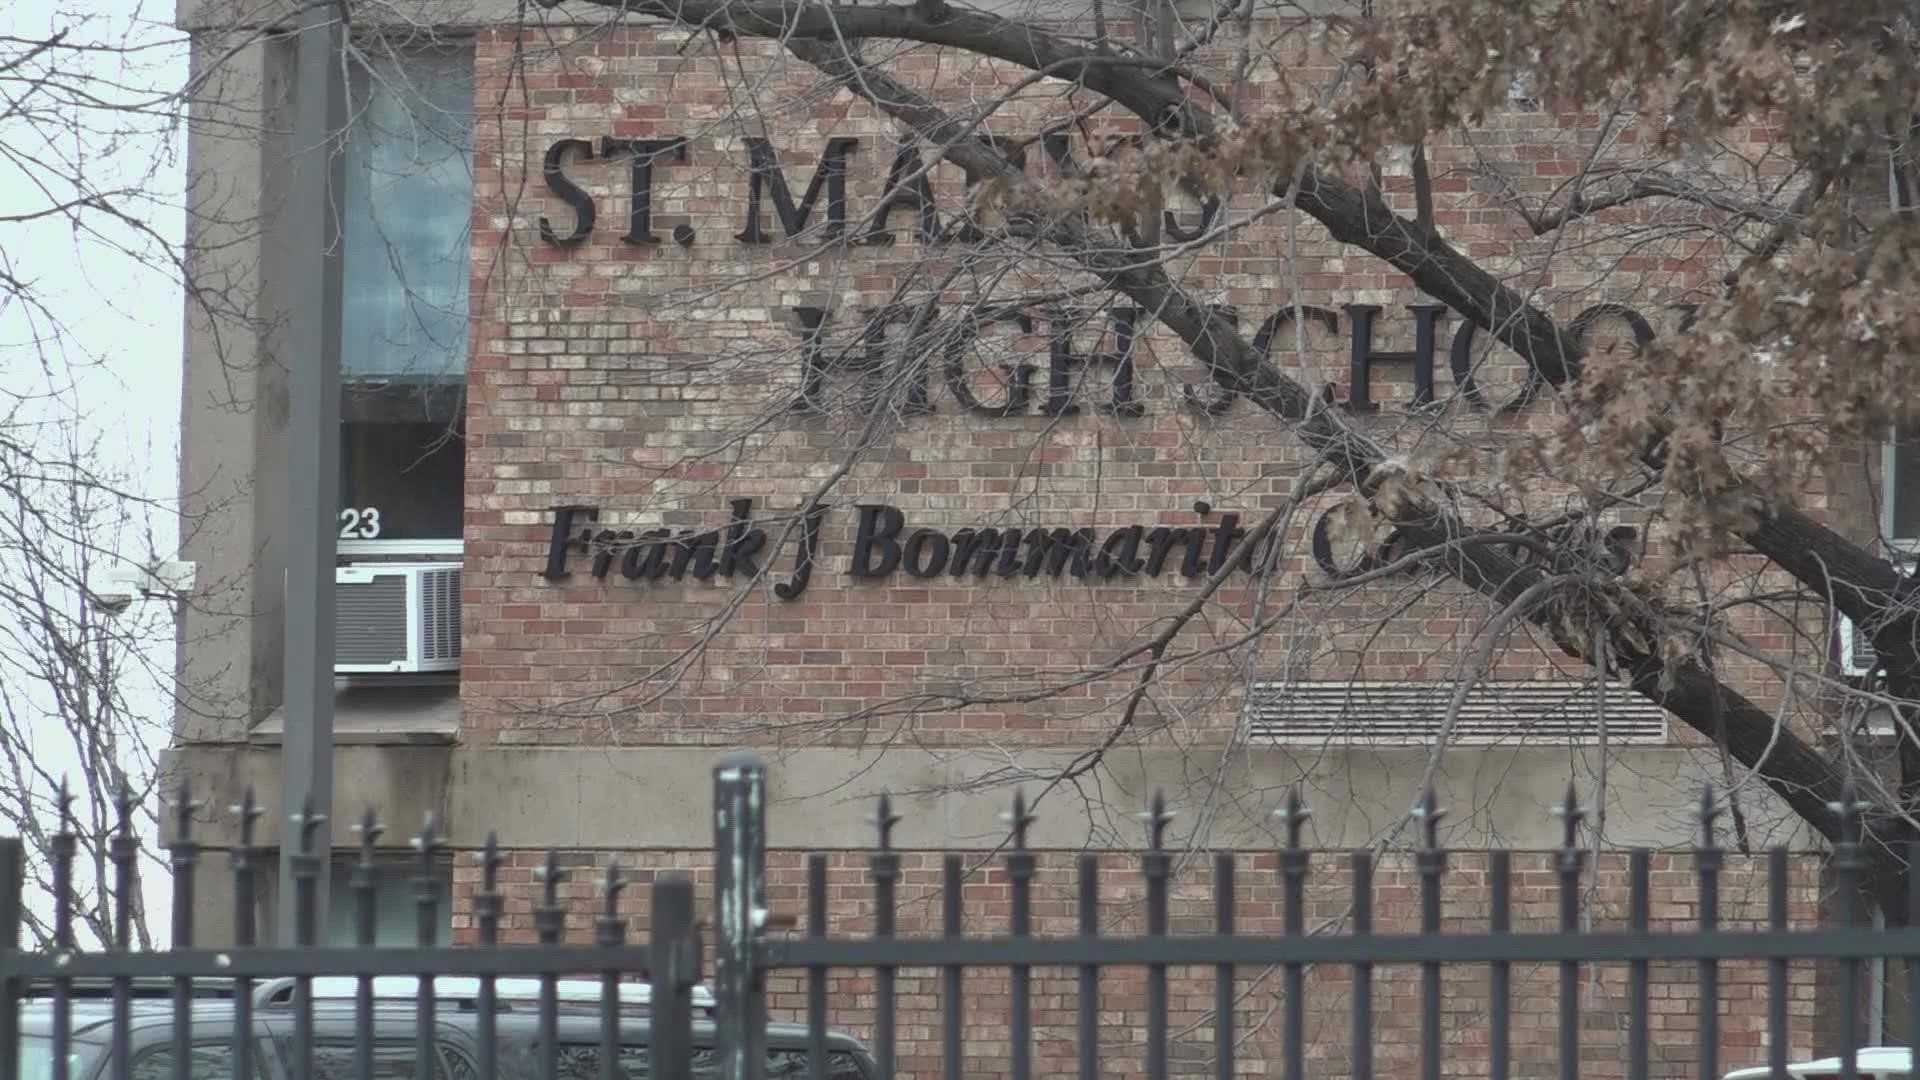 Starting in July 2023, the school will be named St. Mary's Southside Catholic High. It will become a Marianist sponsored school.